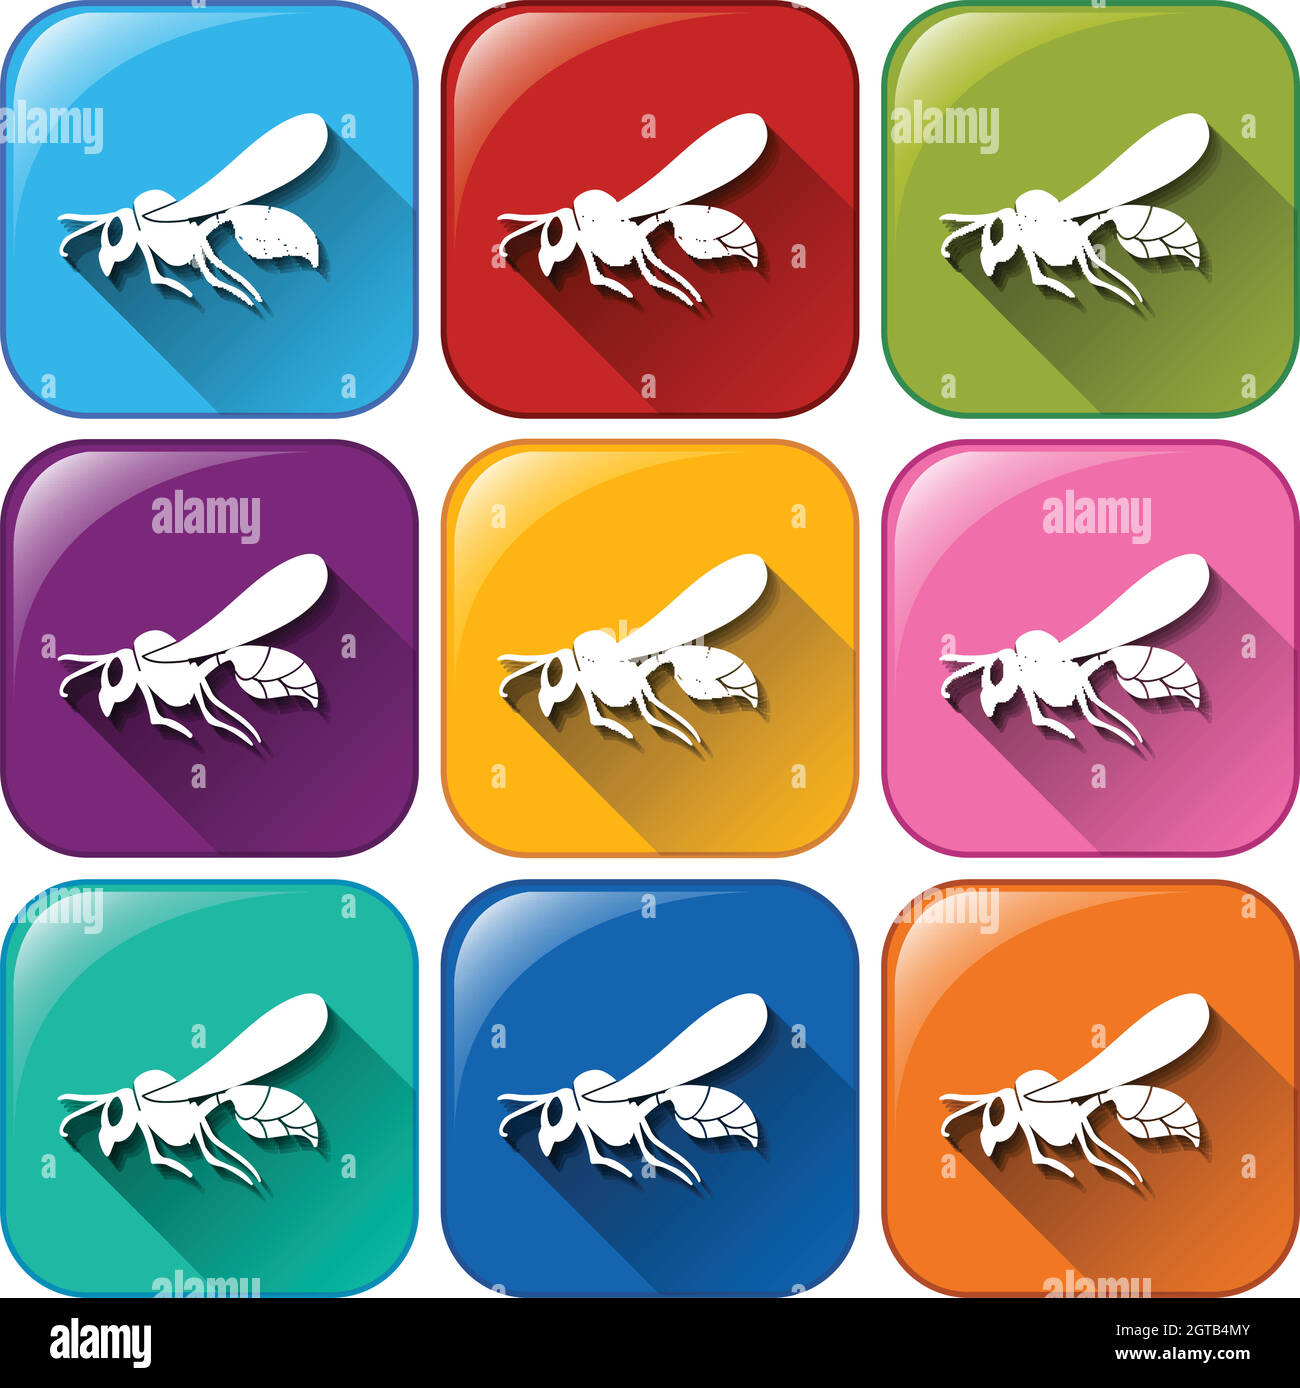 Insect icons Stock Vector